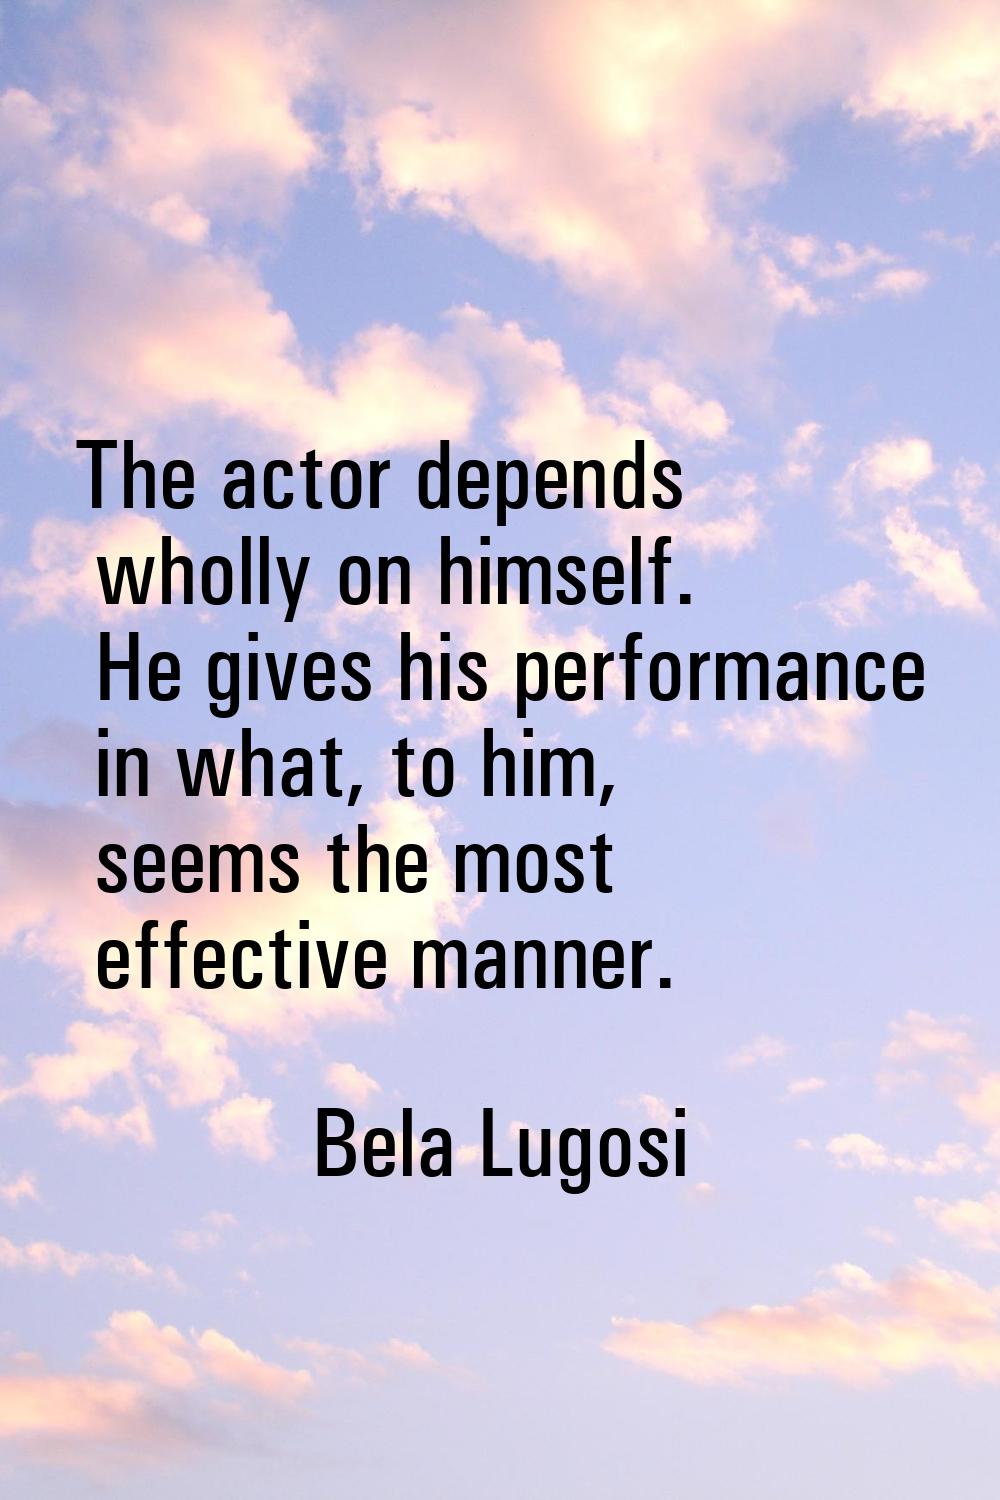 The actor depends wholly on himself. He gives his performance in what, to him, seems the most effec